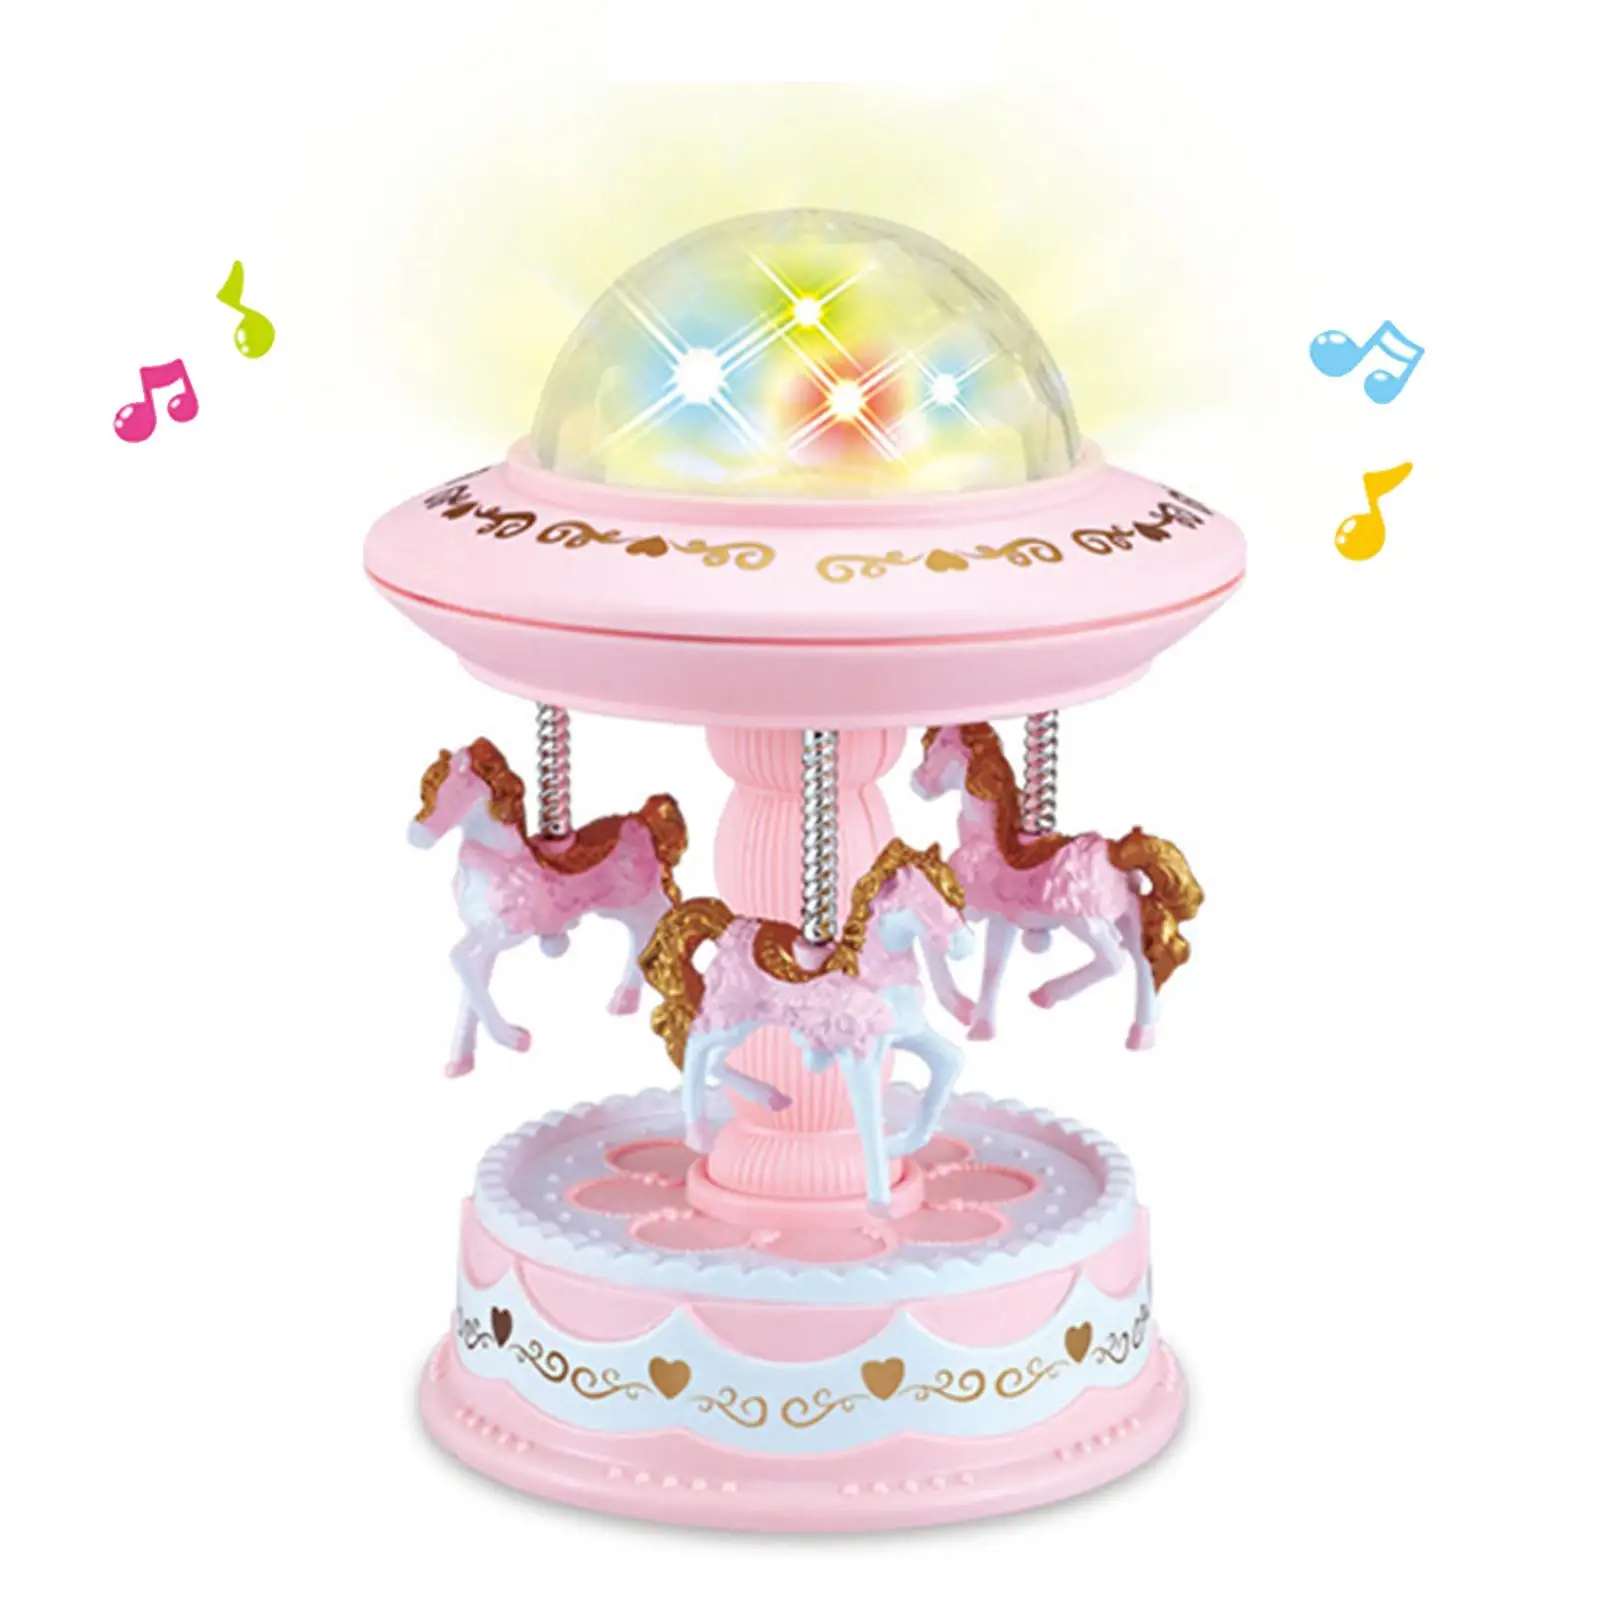 Cute Music Box Projector Night Light Rotatable Horse Carousel Style for Bedroom Anniversary Desktop Valentine Day Ornament